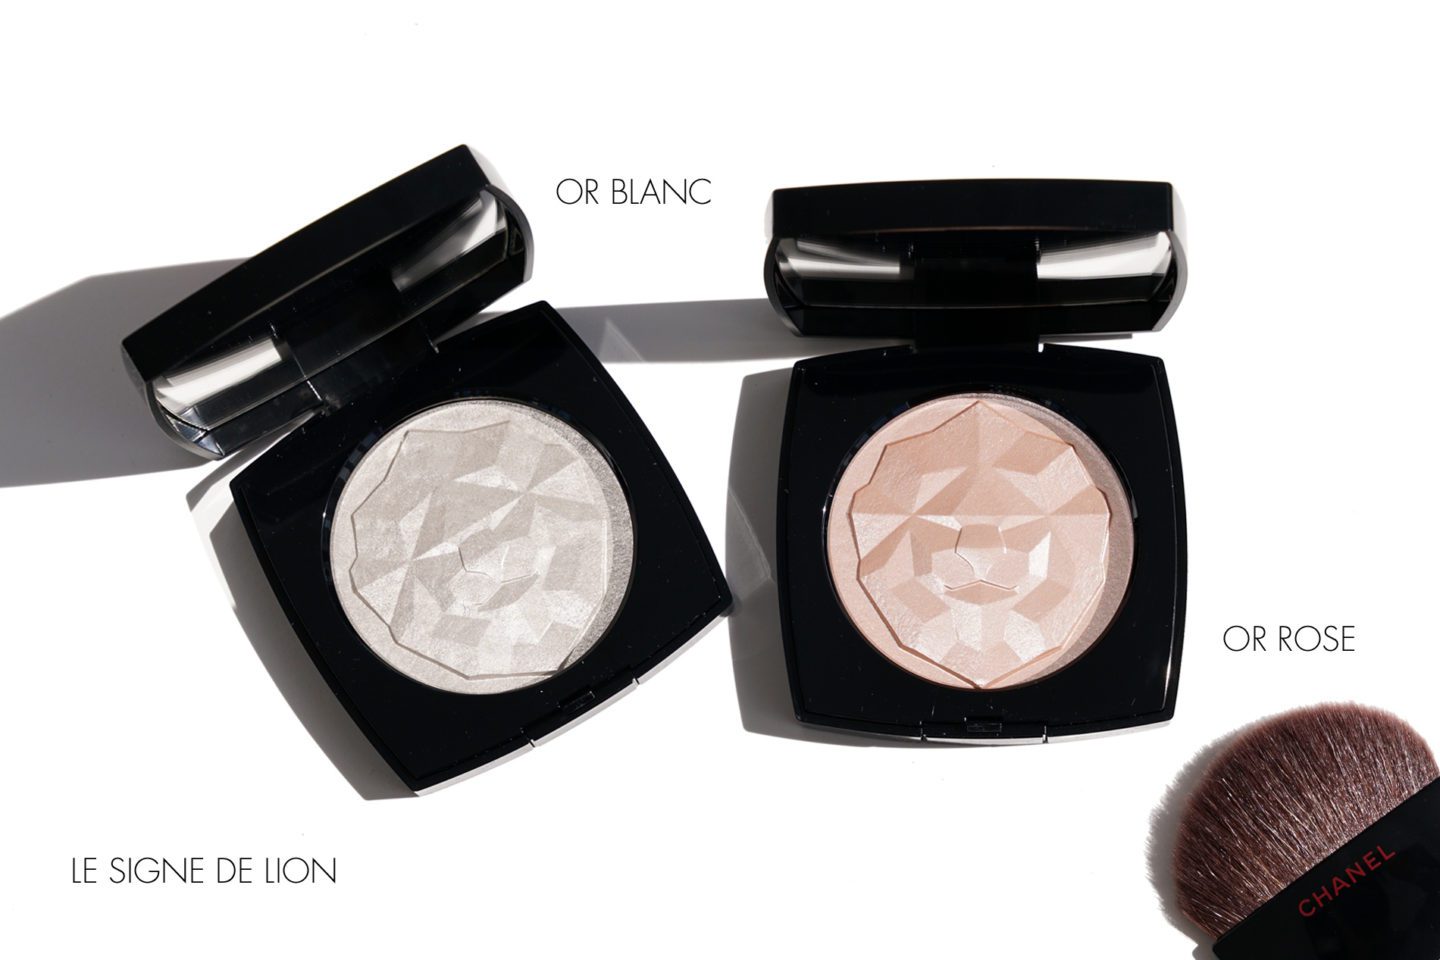 Chanel Le Signe du Lion Illuminating Powder Review | The Beauty Look Book